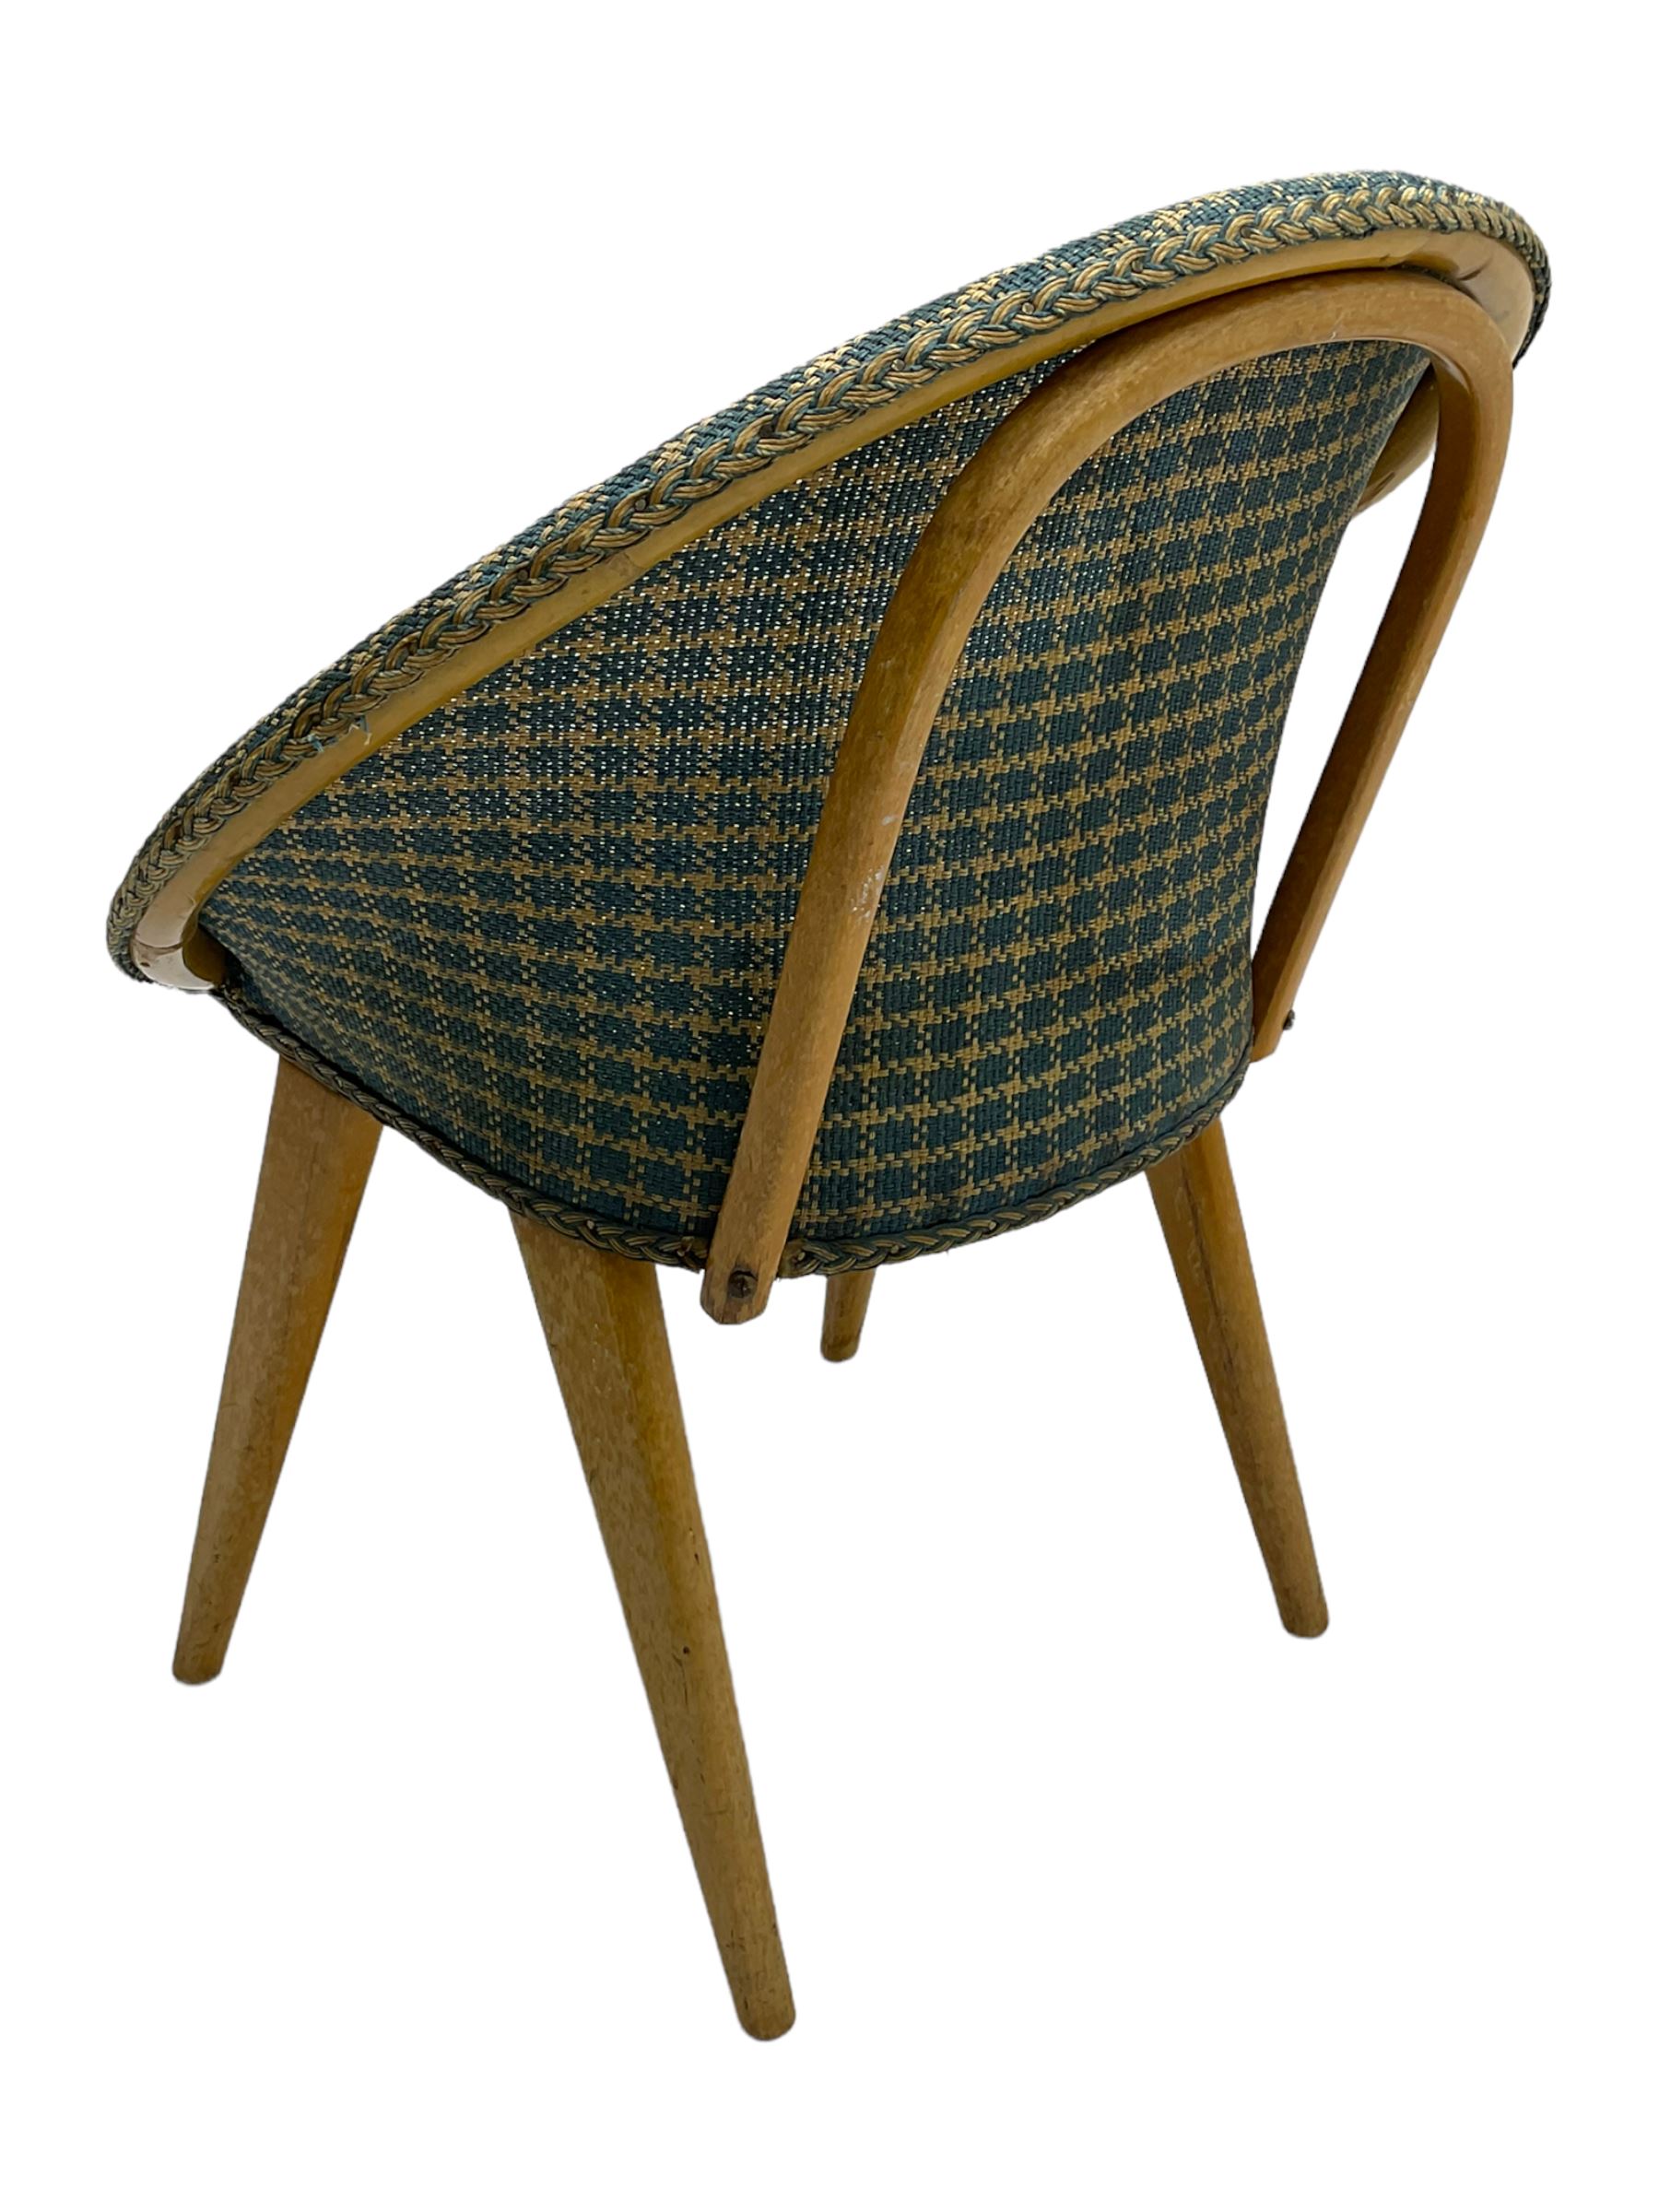 Mid-20th century satellite basket chair - Image 3 of 3